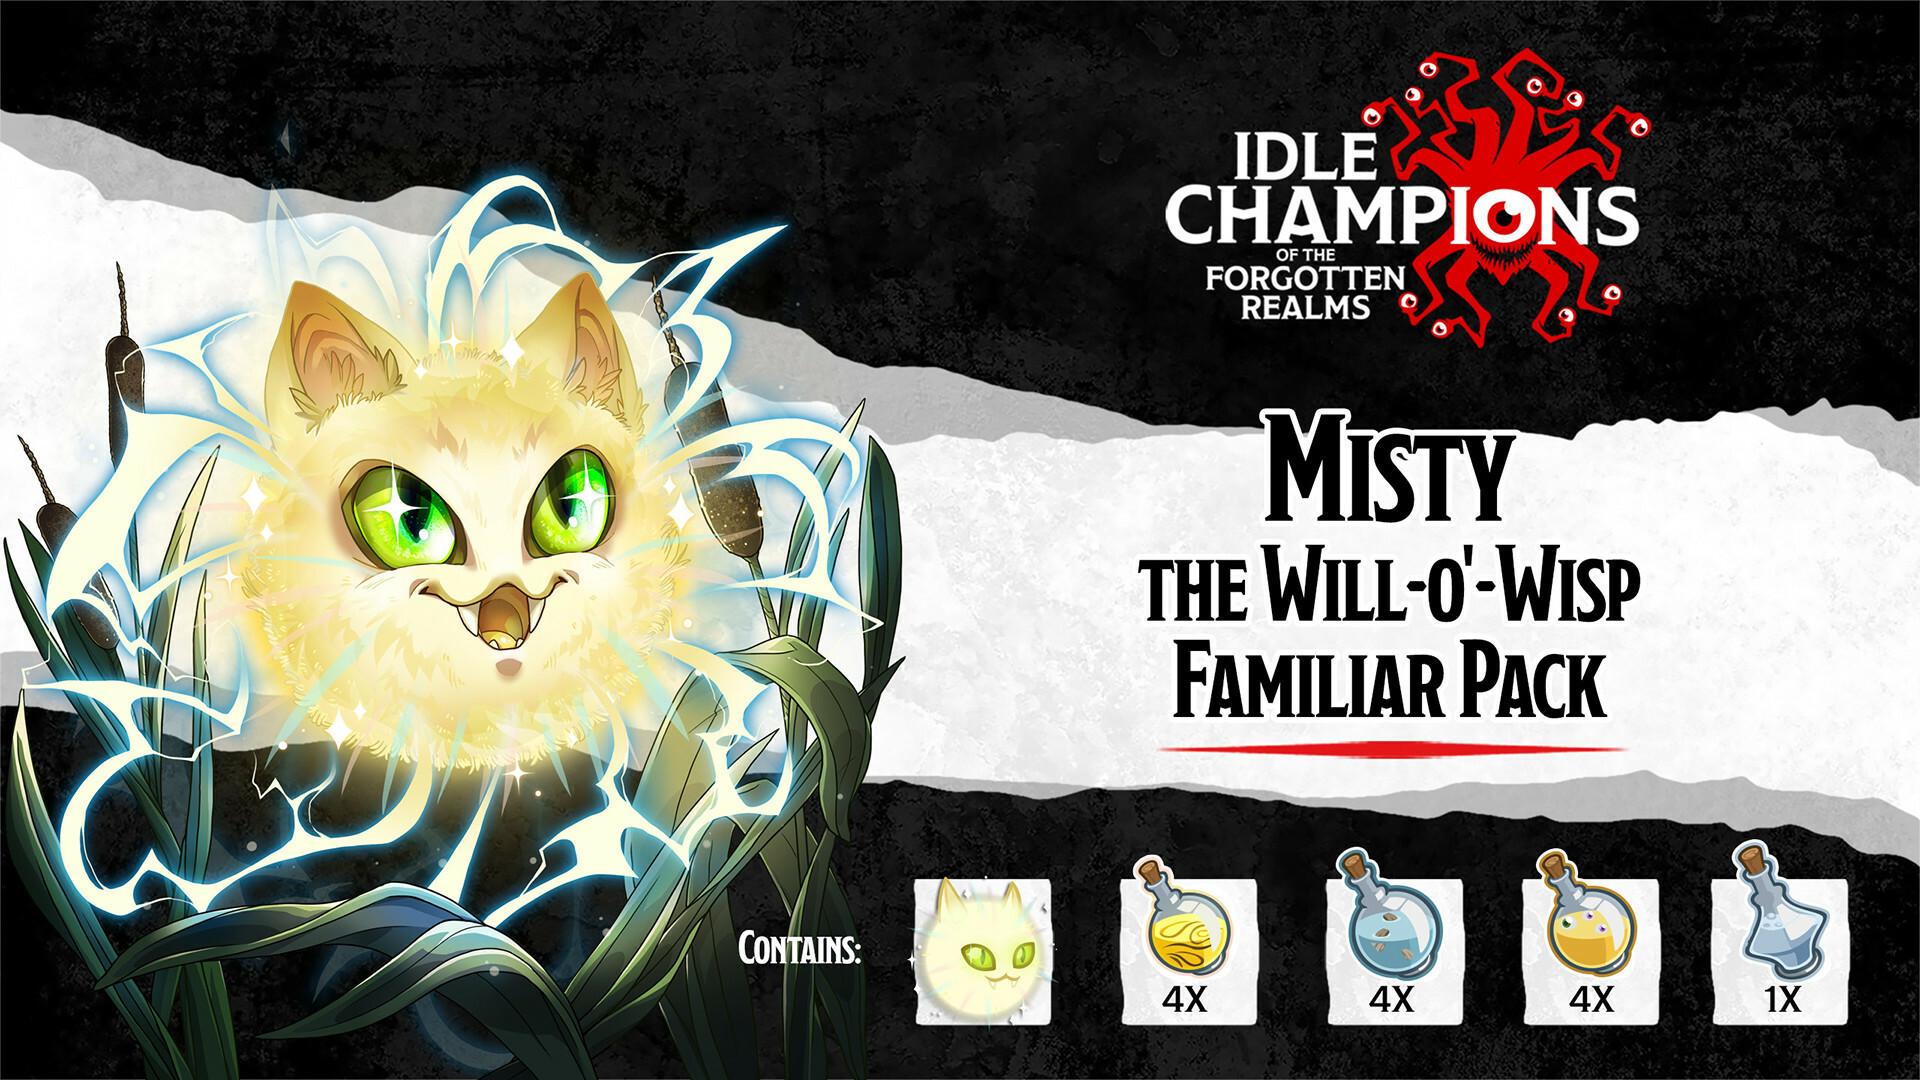 Idle Champions - Misty the Will-o'-Wisp Familiar Pack